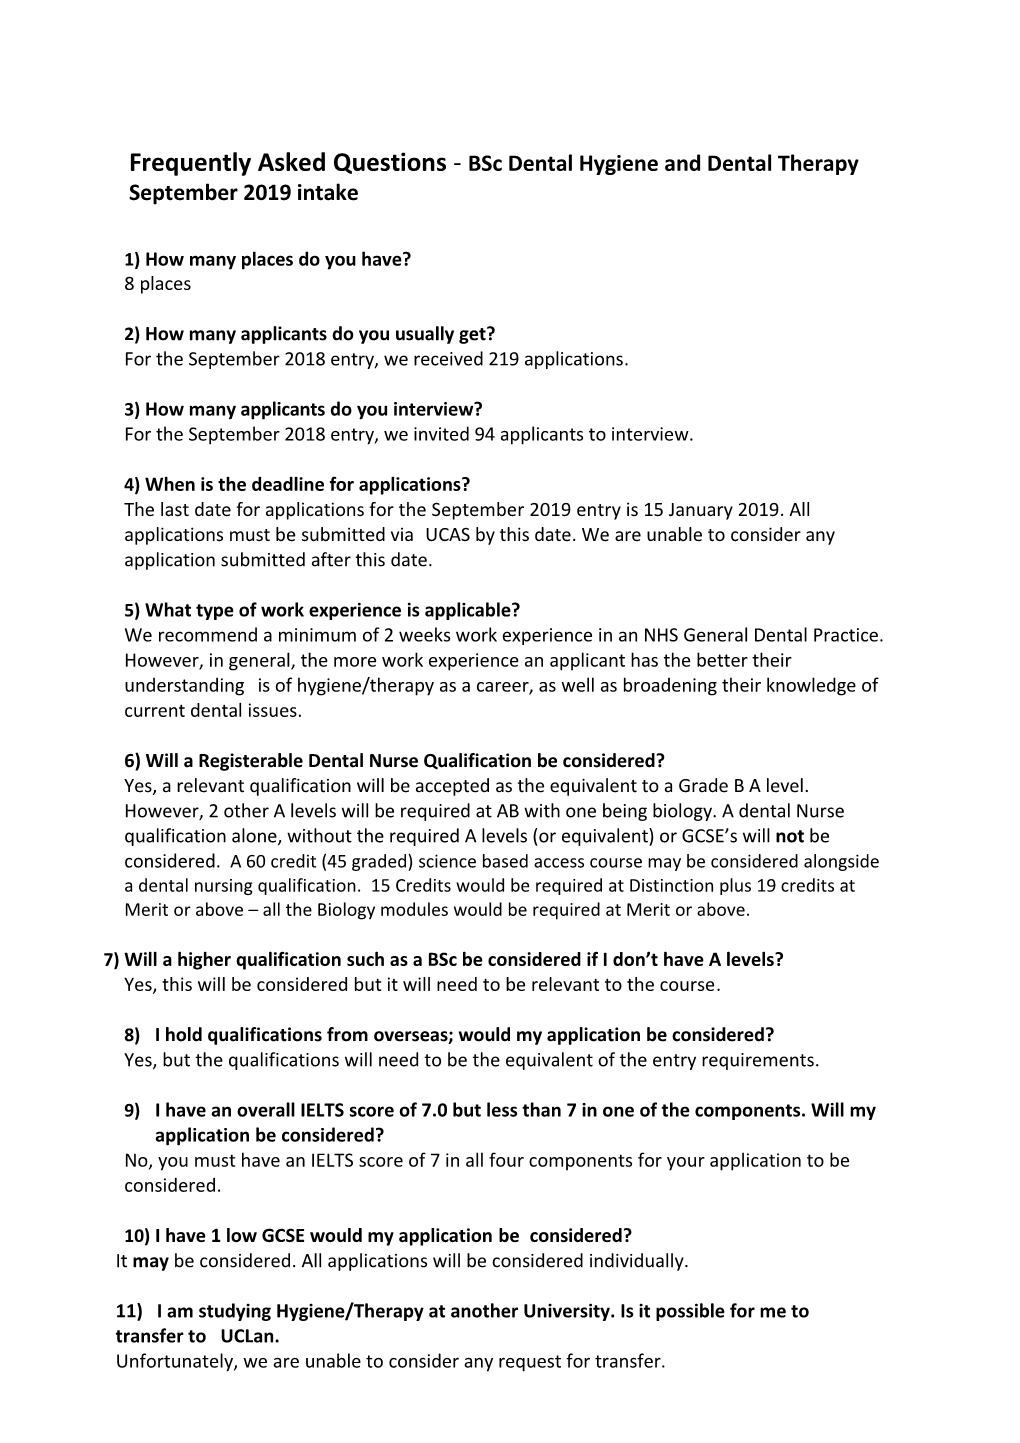 Frequentlyaskedquestions - Bsc Dental Hygiene and Dental Therapy September 2019 Intake